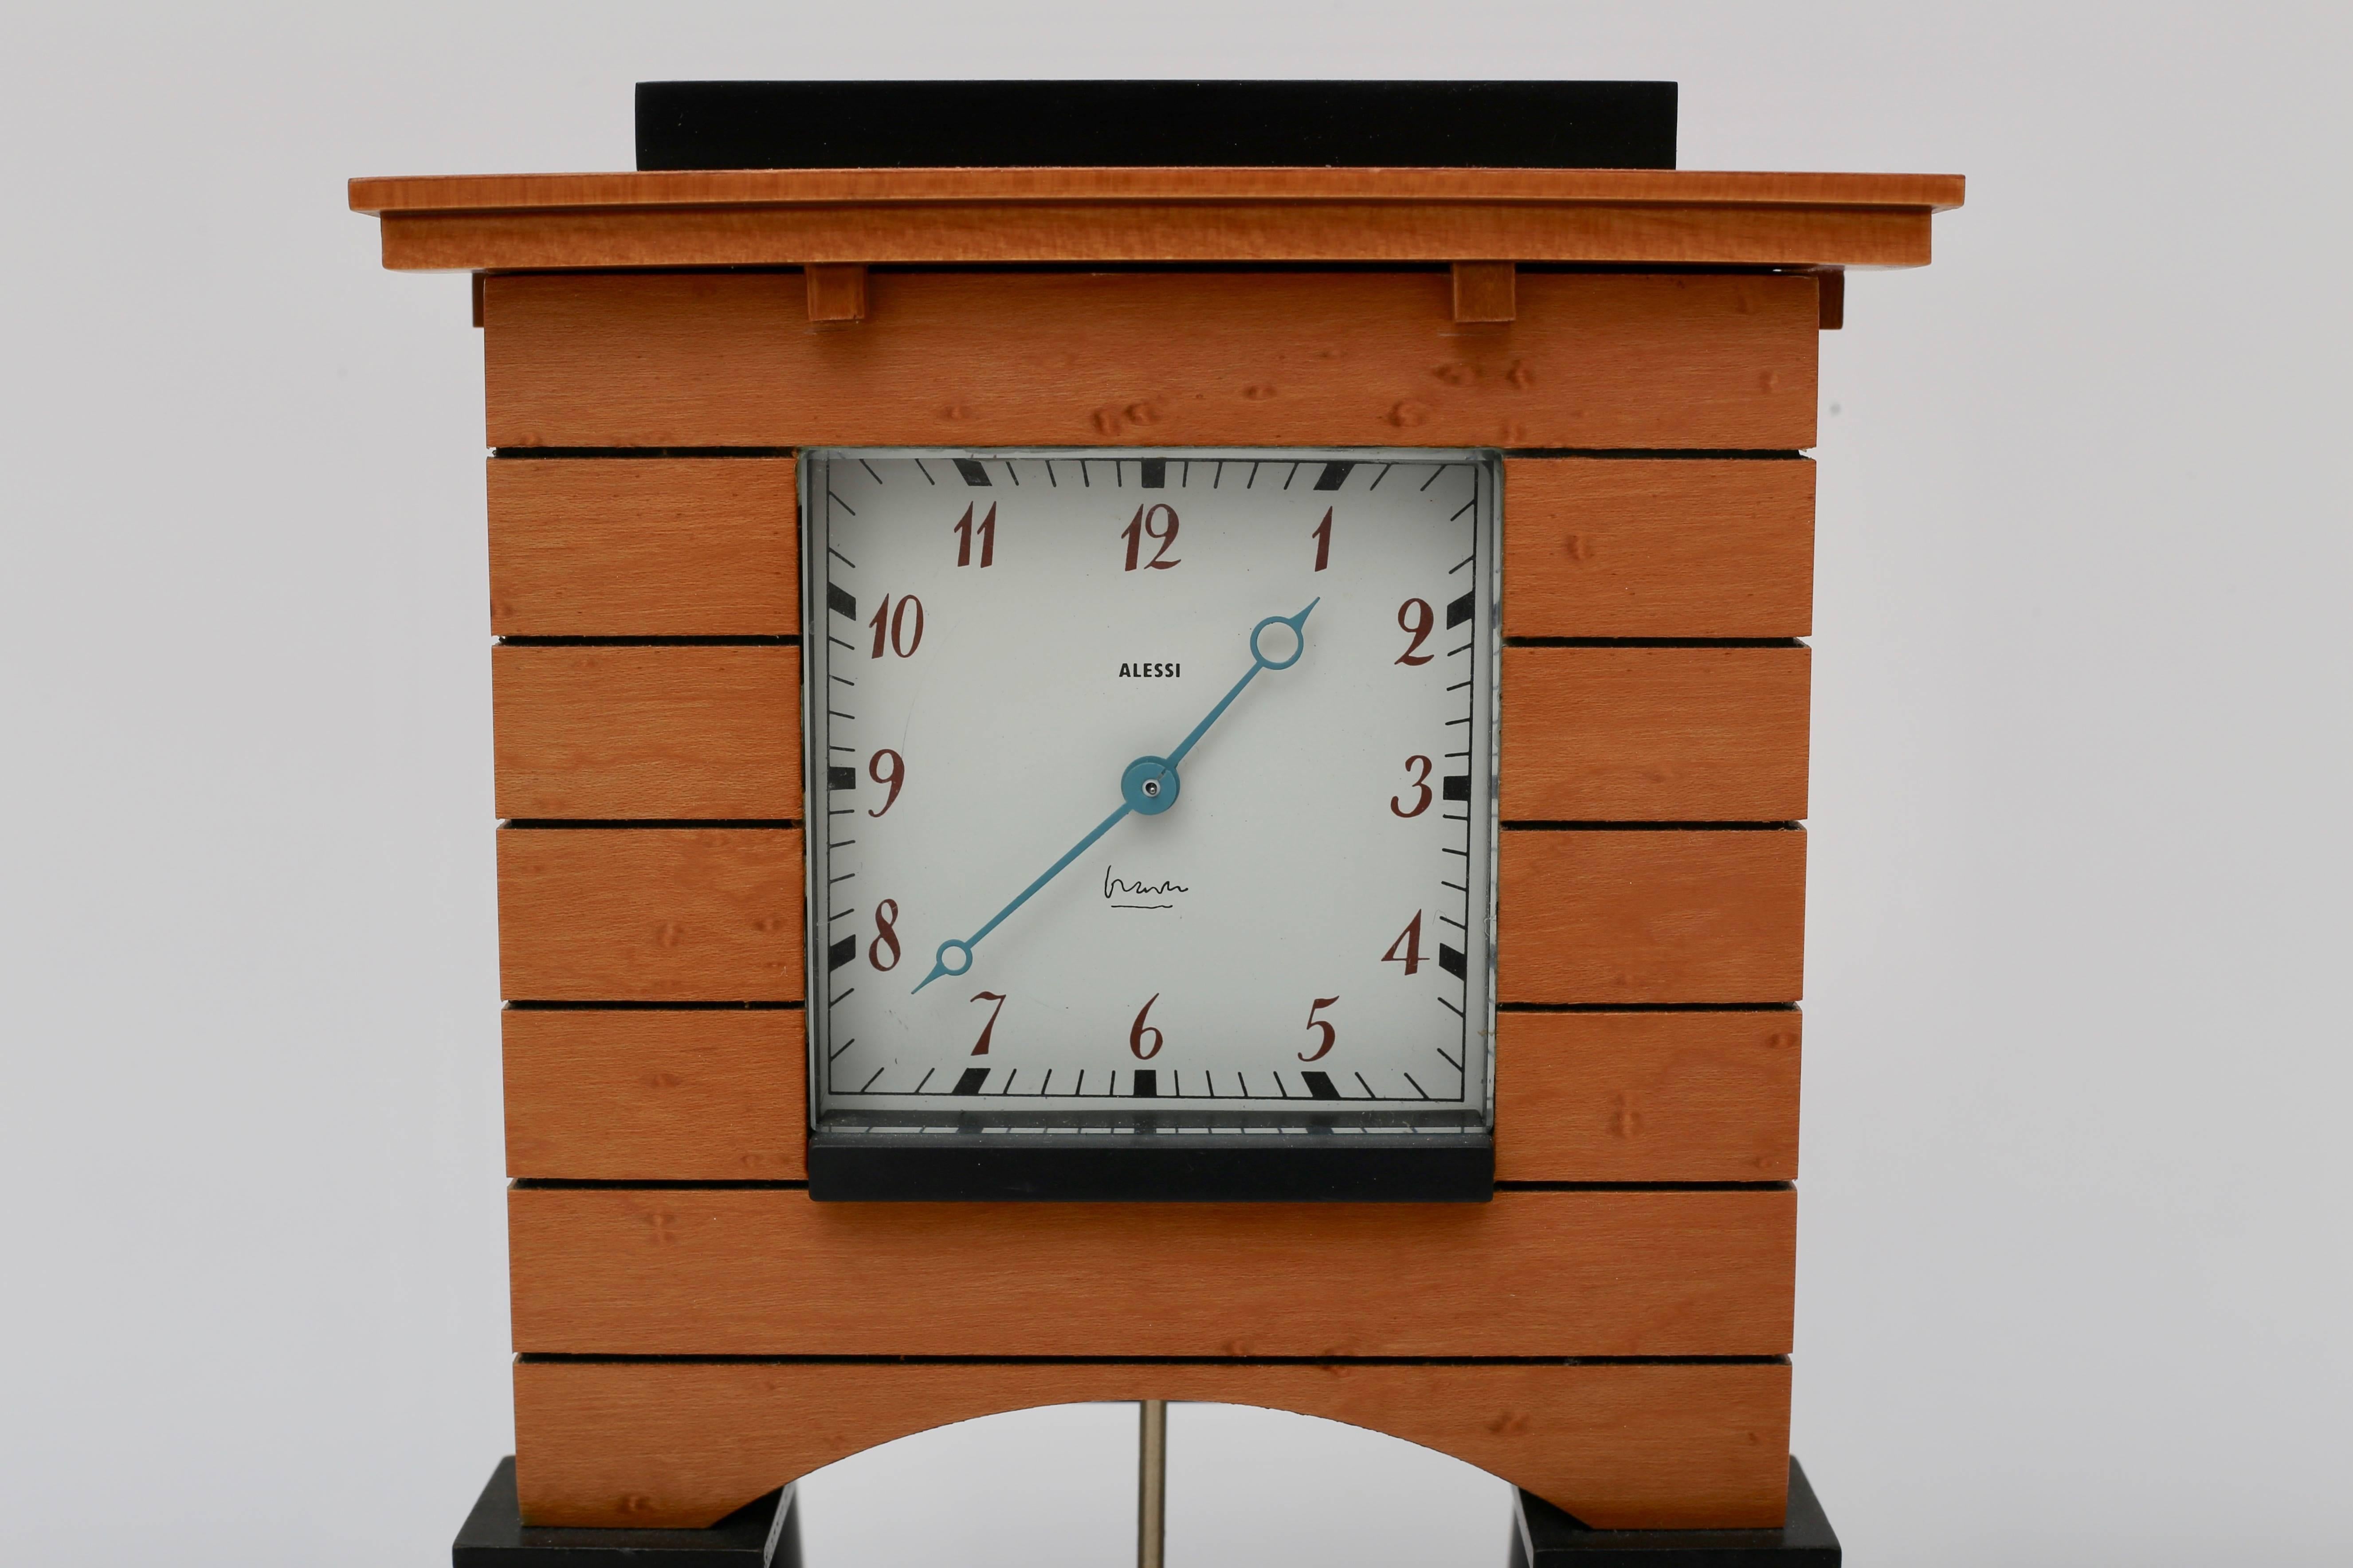 This stylish Postmodern mantel clock was designed in 1986 by Michael Graves for Alessi, Michael Graves designs are iconic and classic with his use of line and materials.

Note: Requires one AA battery.

Note: The top of the clock has a slight bow to